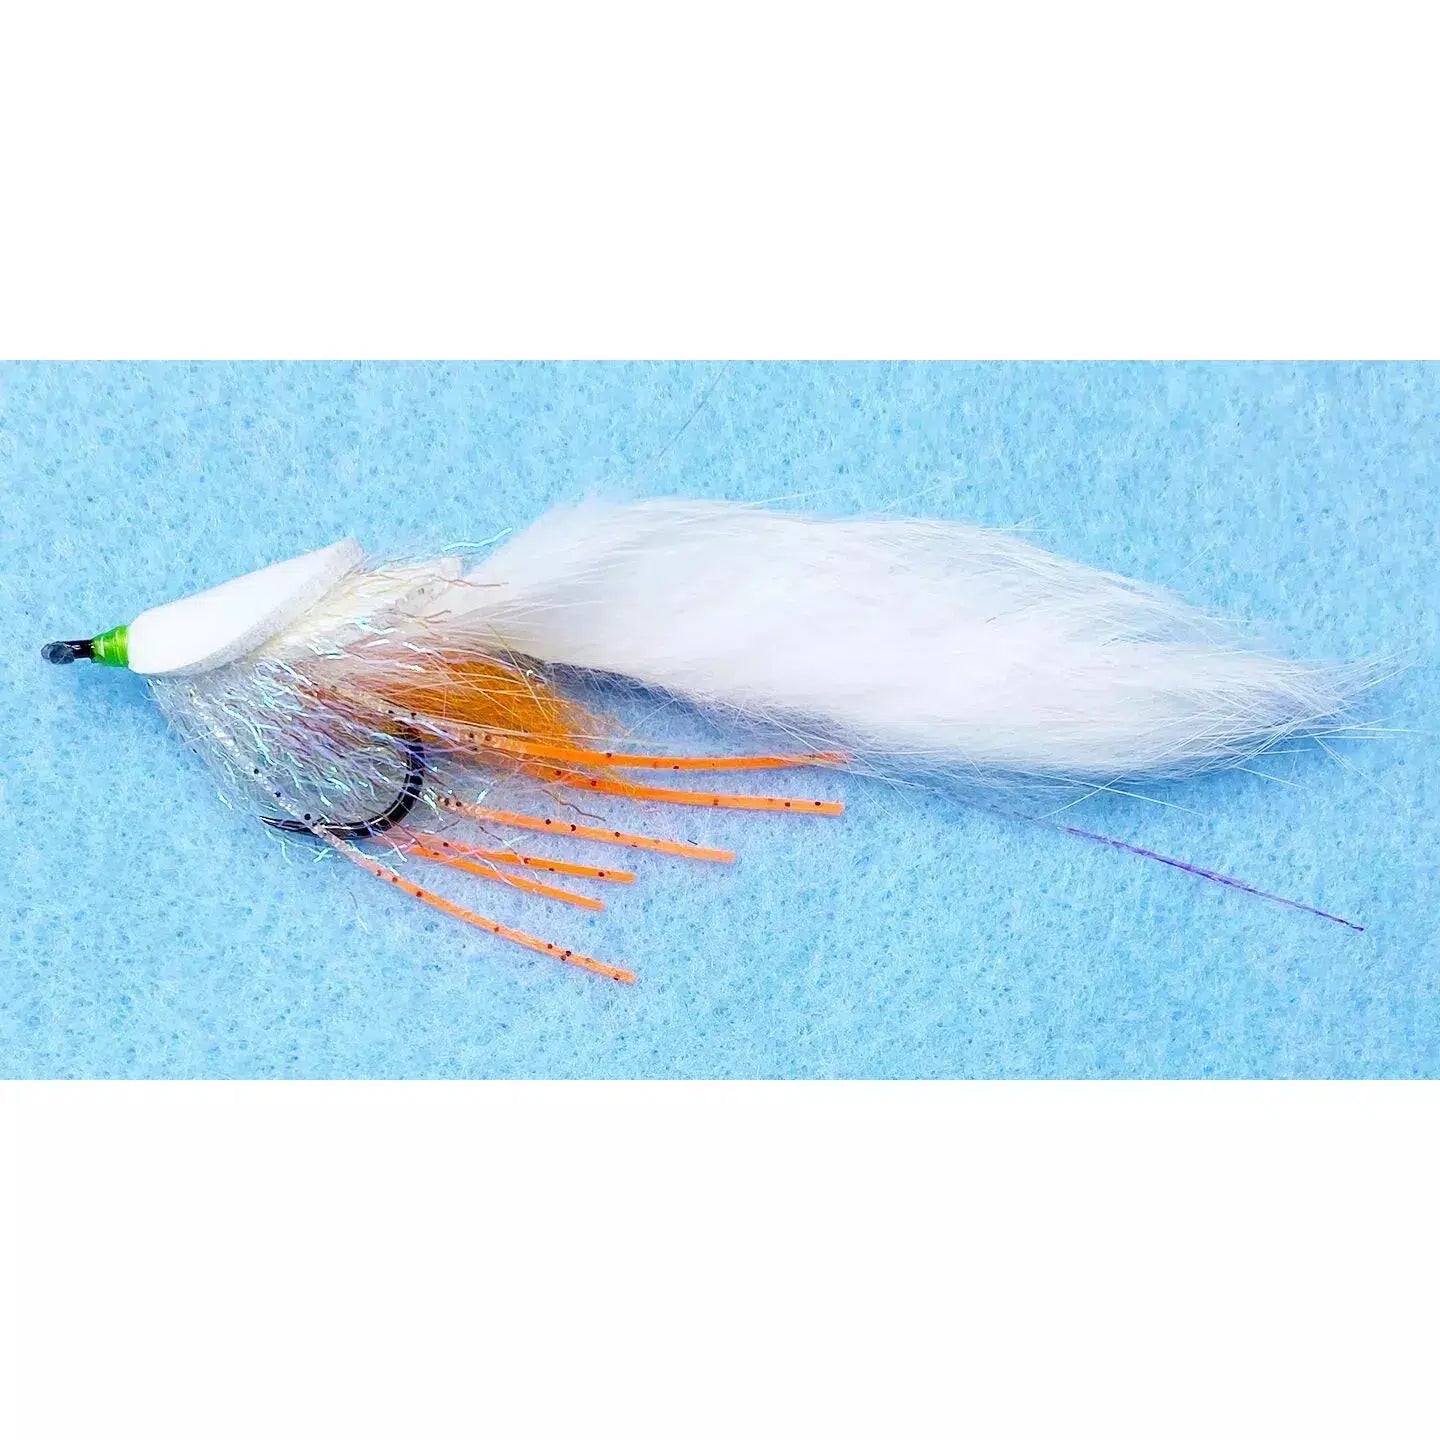 Enrico Puglisi Diver Fly-Lure - Fly-Enrico Puglisi-Crystal White-Size 2/0-Fishing Station